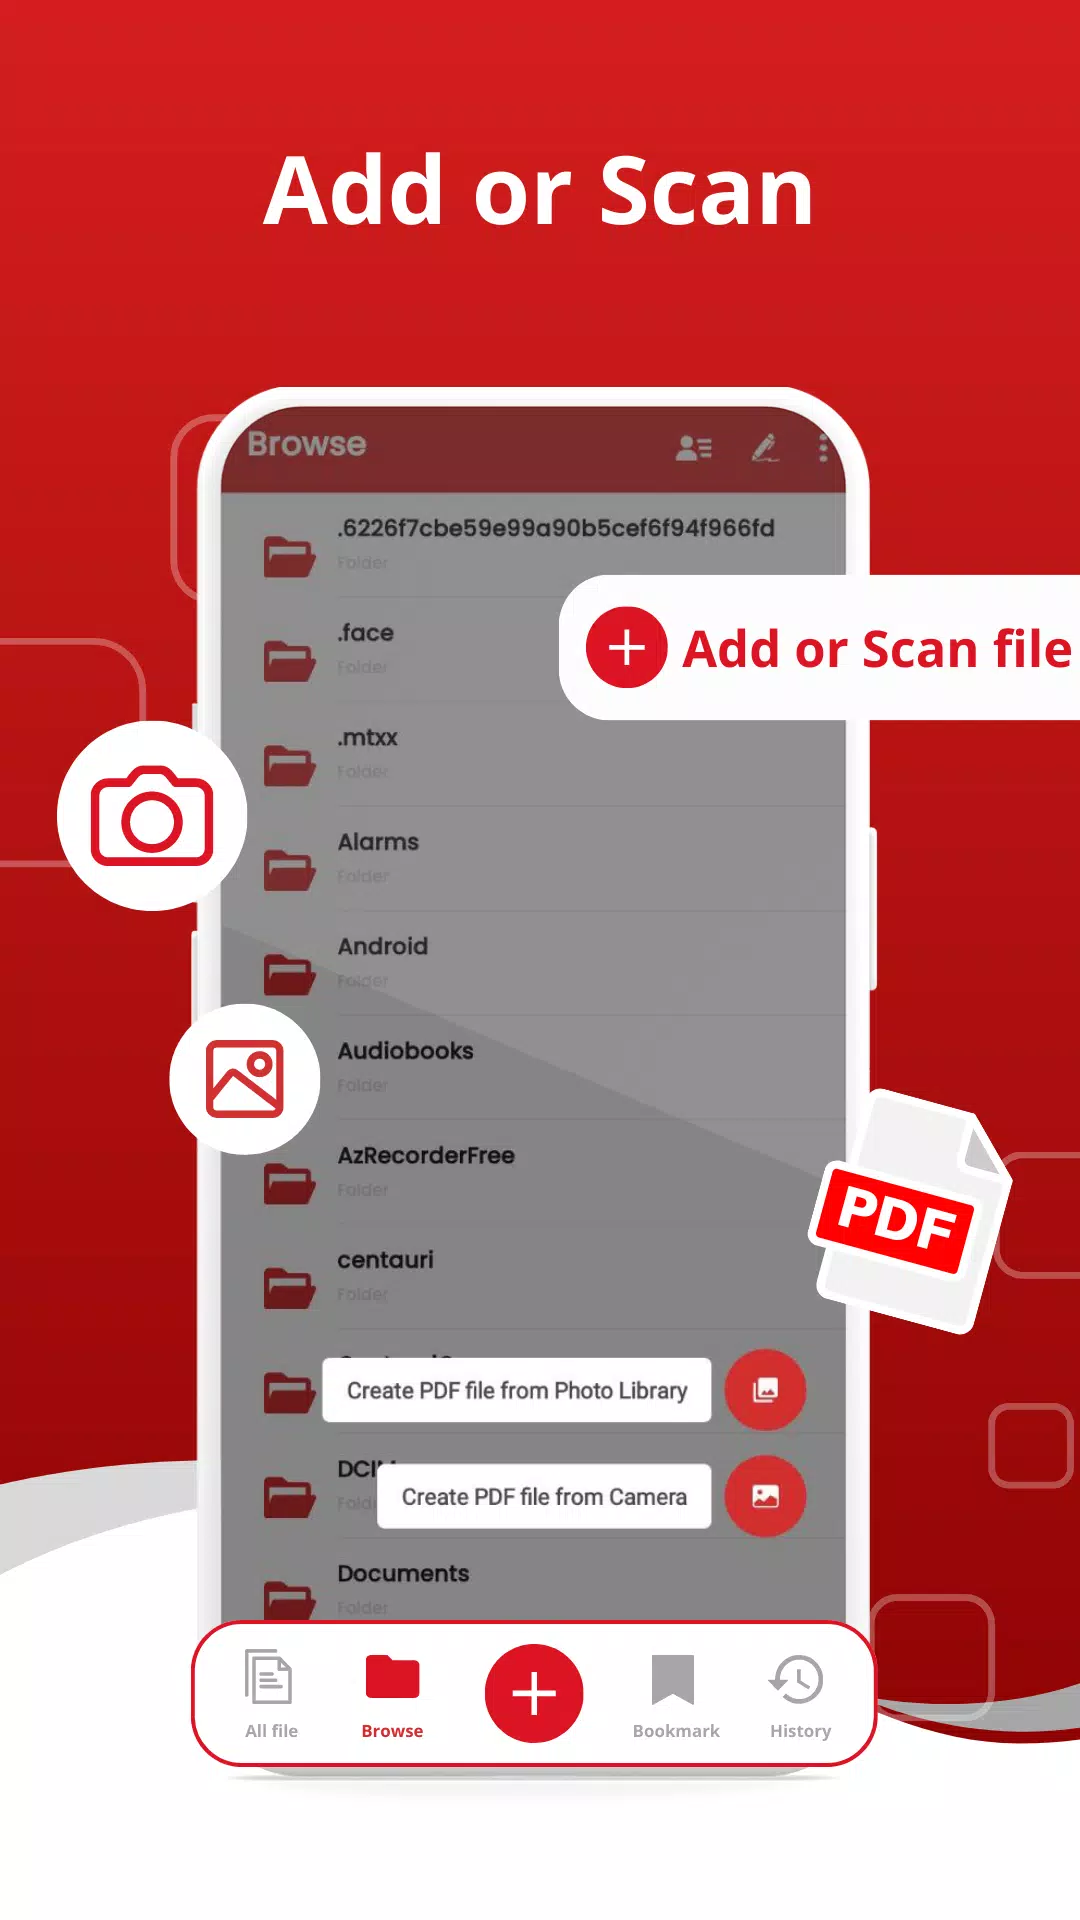 pdfFiller Edit Sign & Fill PDF - APK Download for Android